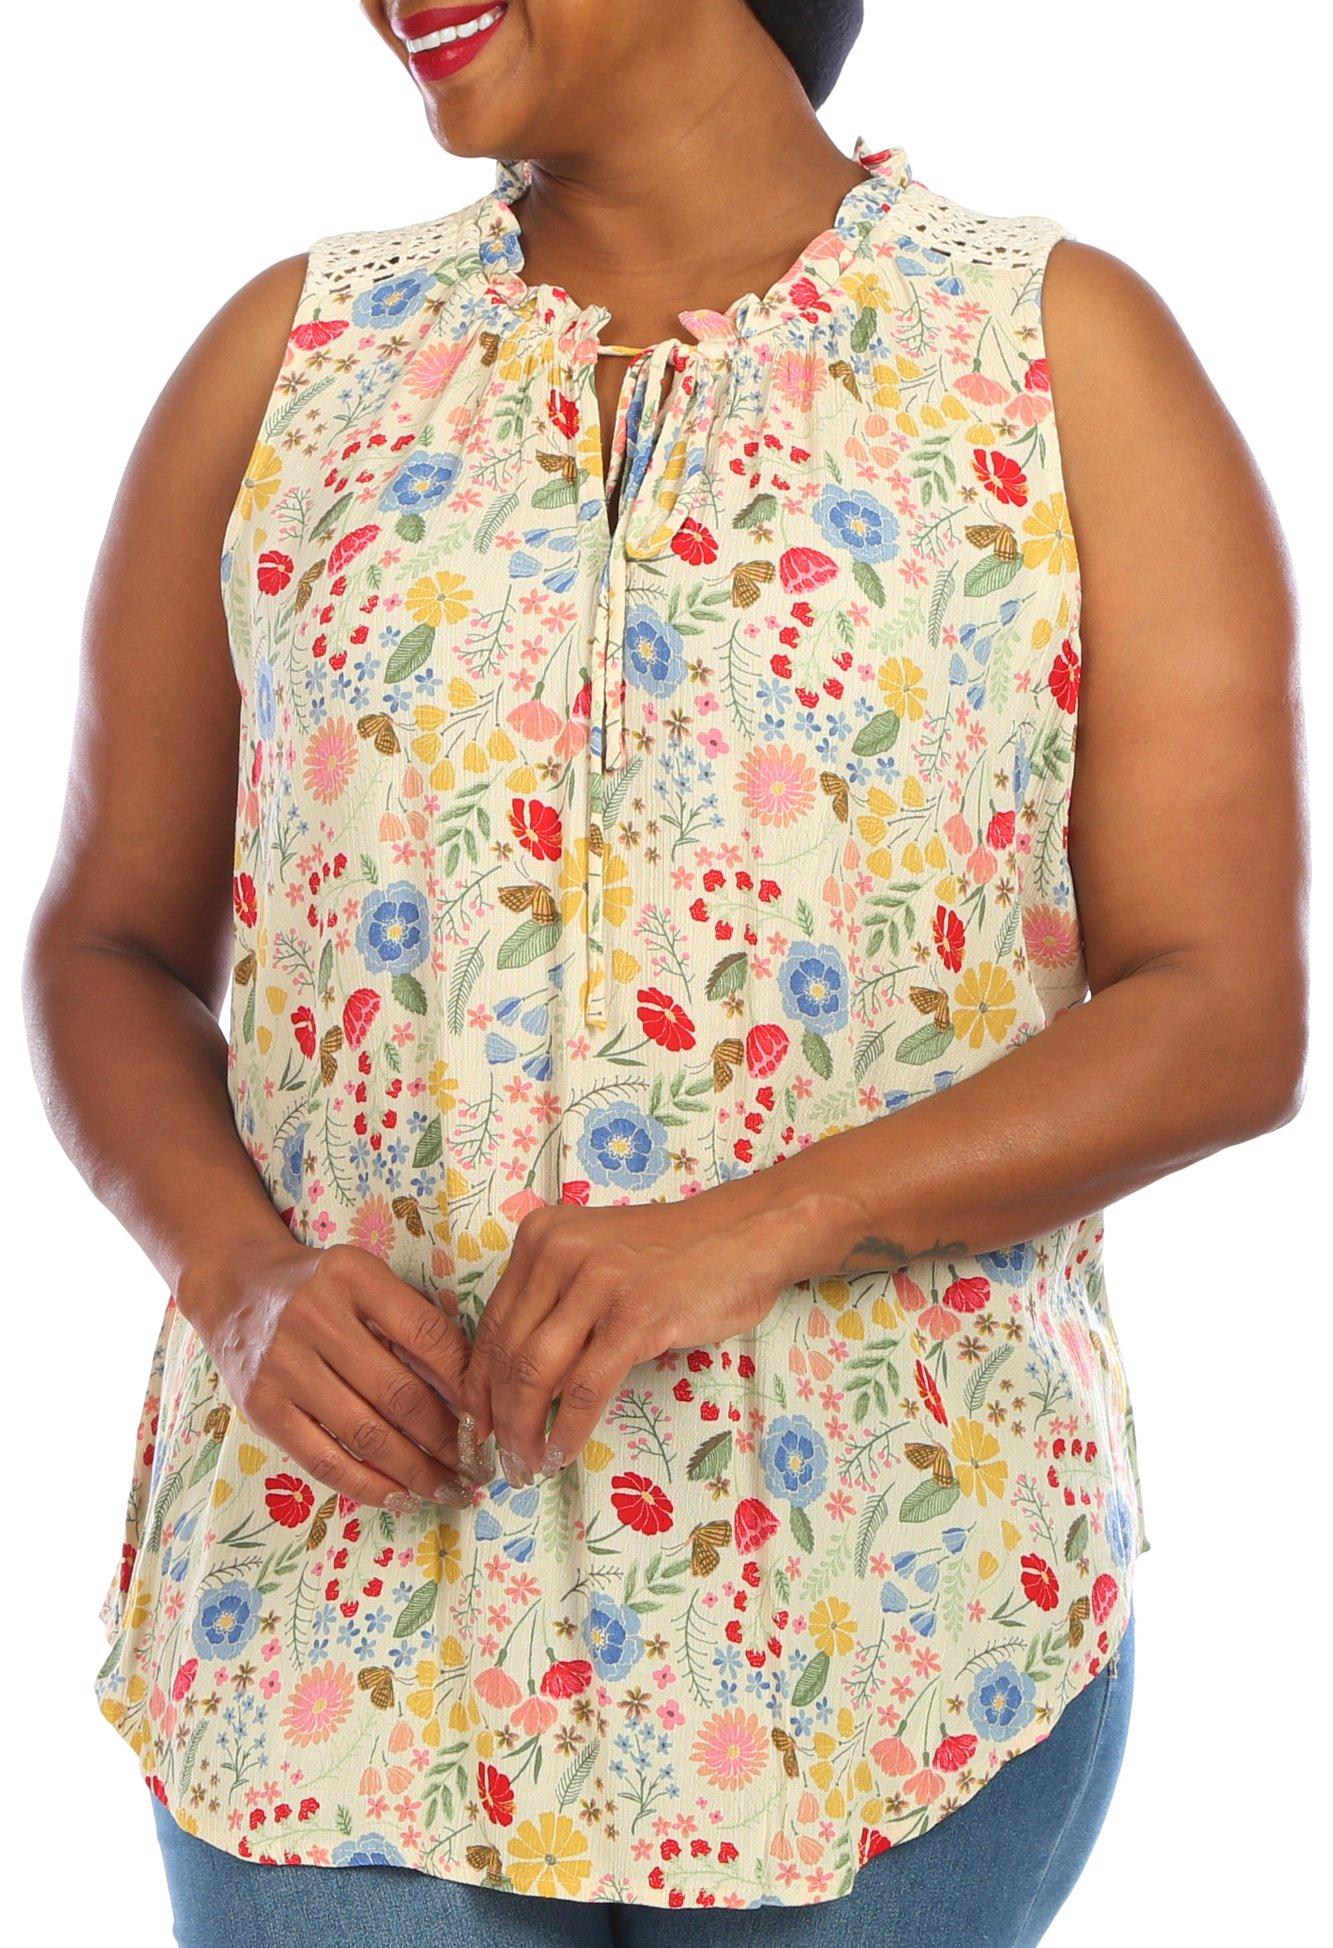 Plus Floral Crochet Embellished Sleeveless Top